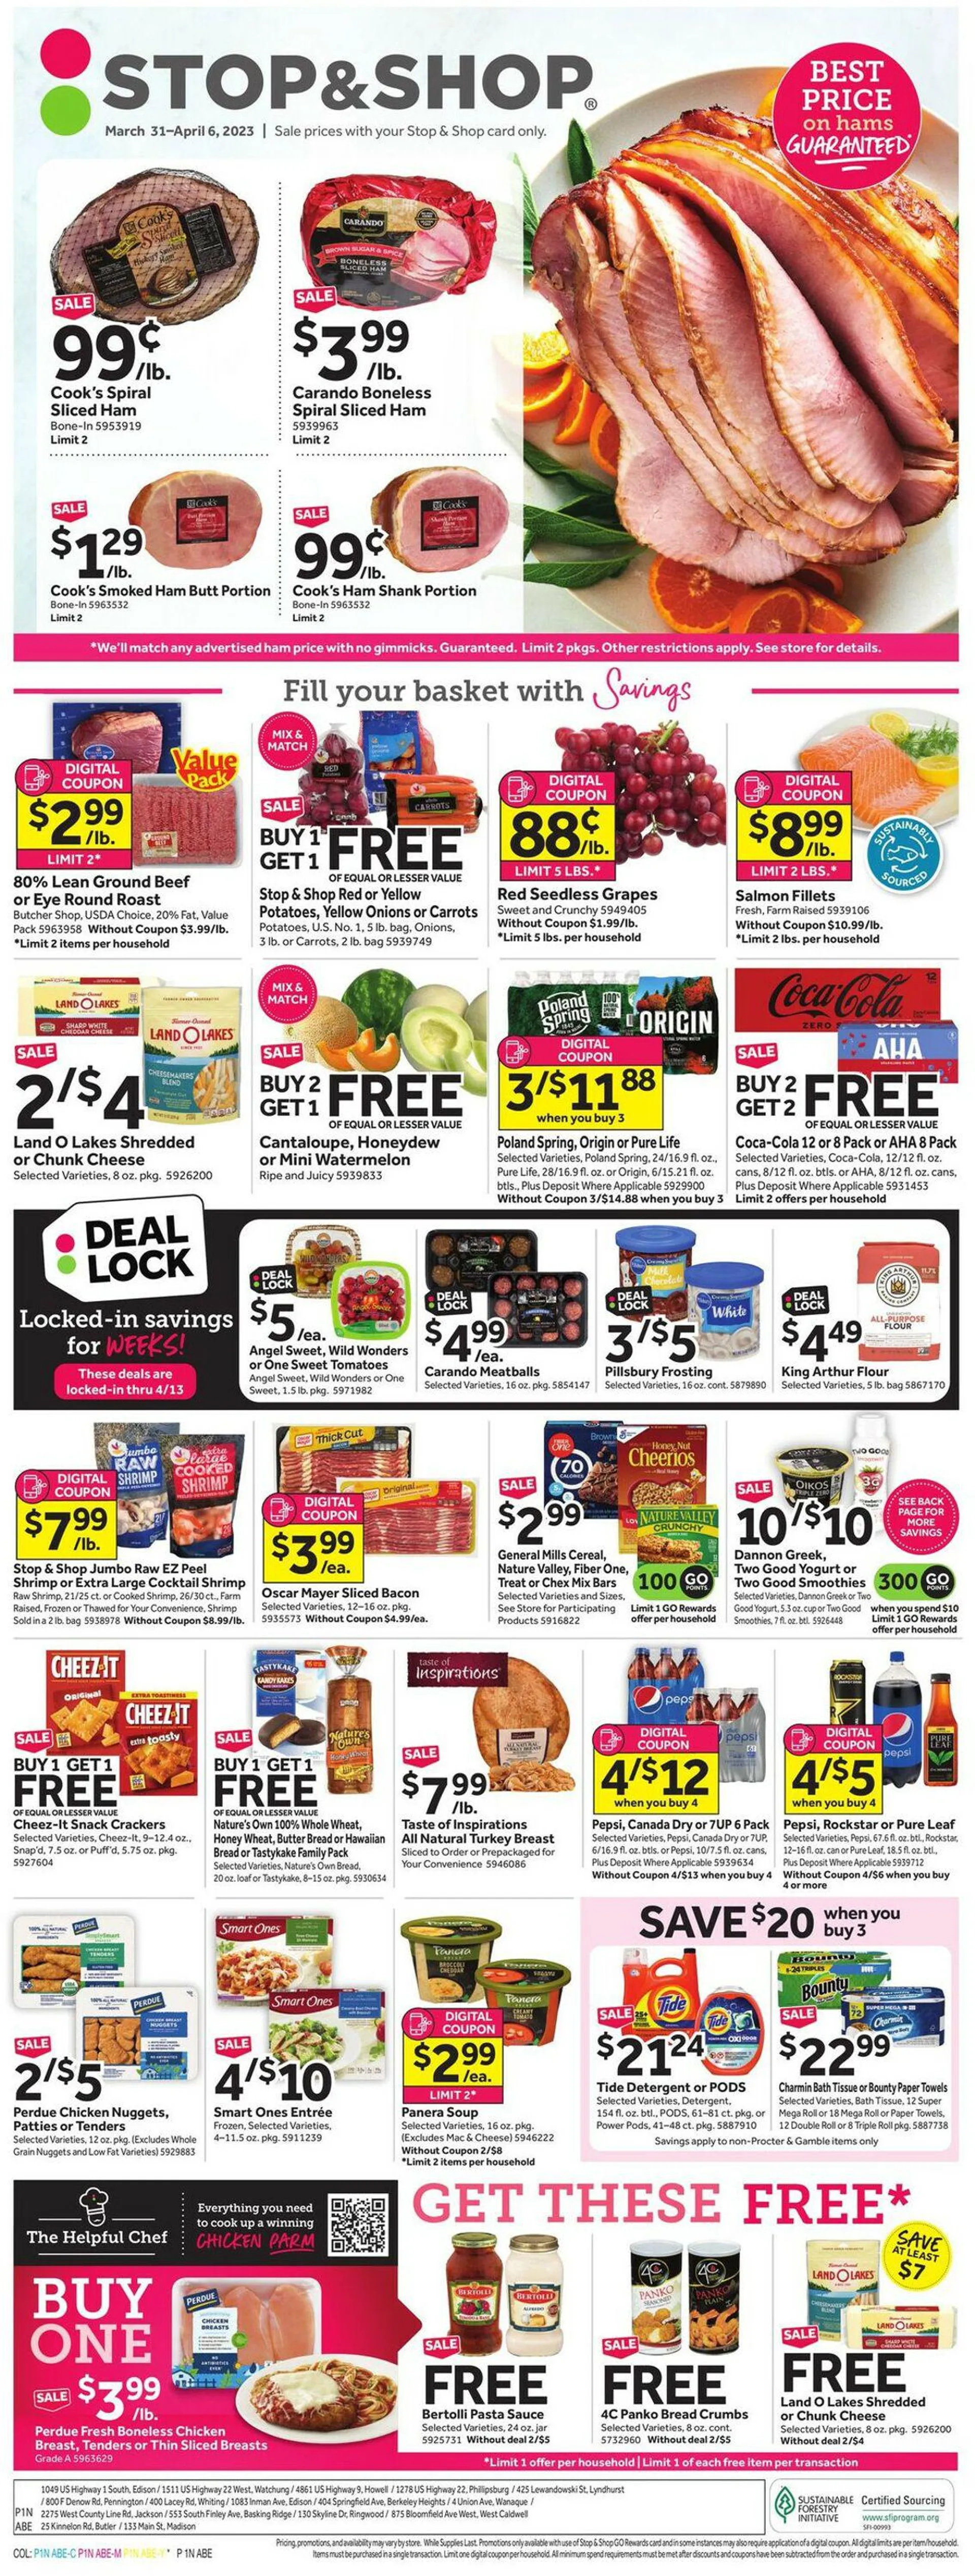 Stop and Shop Current weekly ad - 1